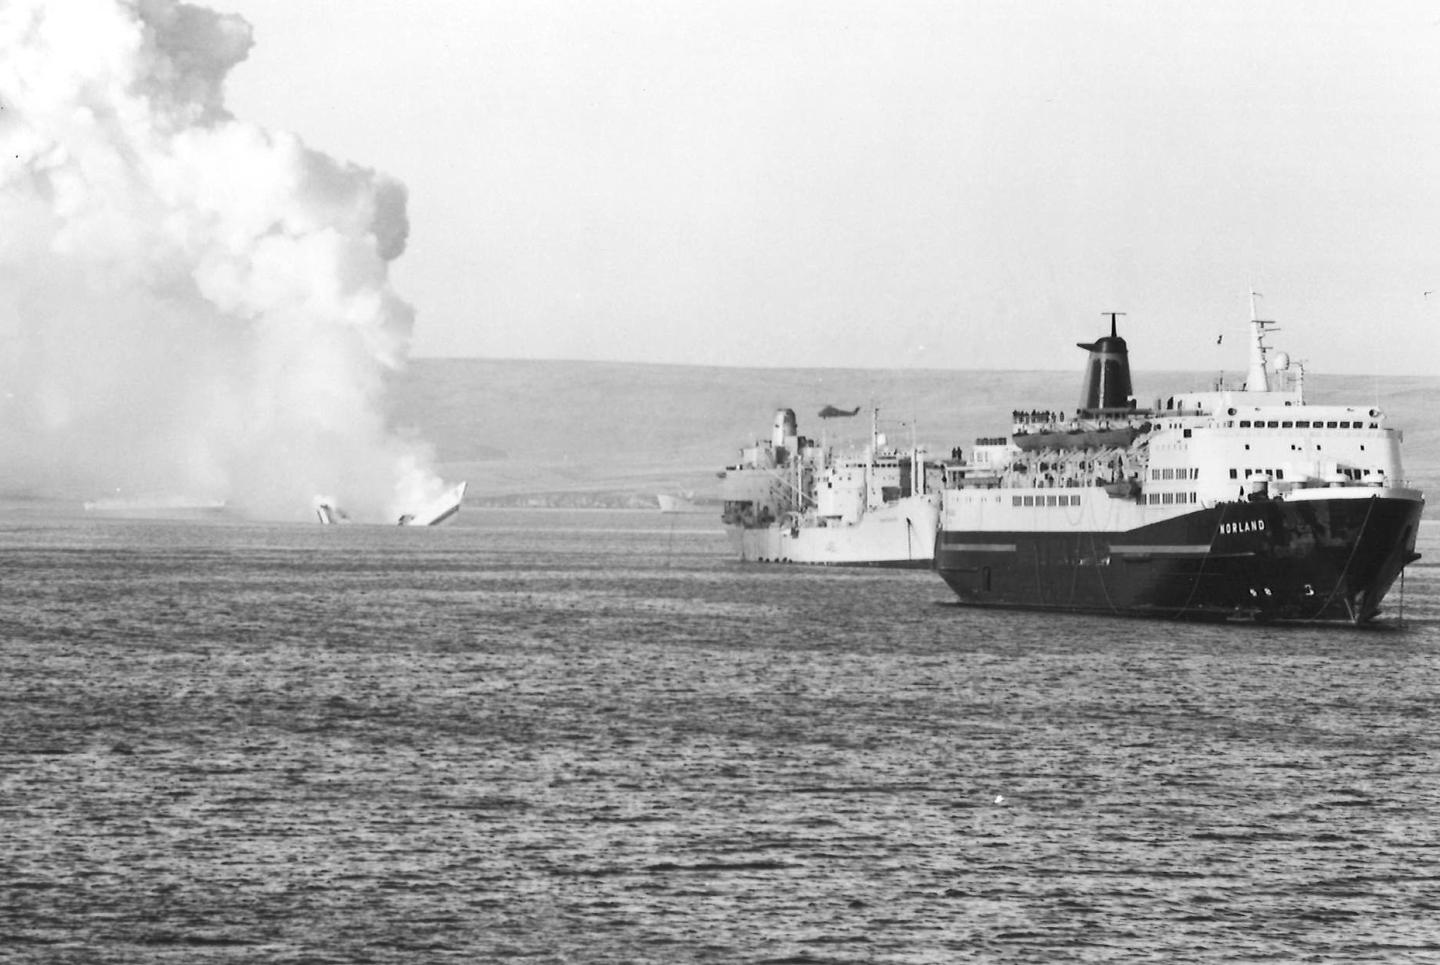 Photograph of a sinking ship in the Falklands